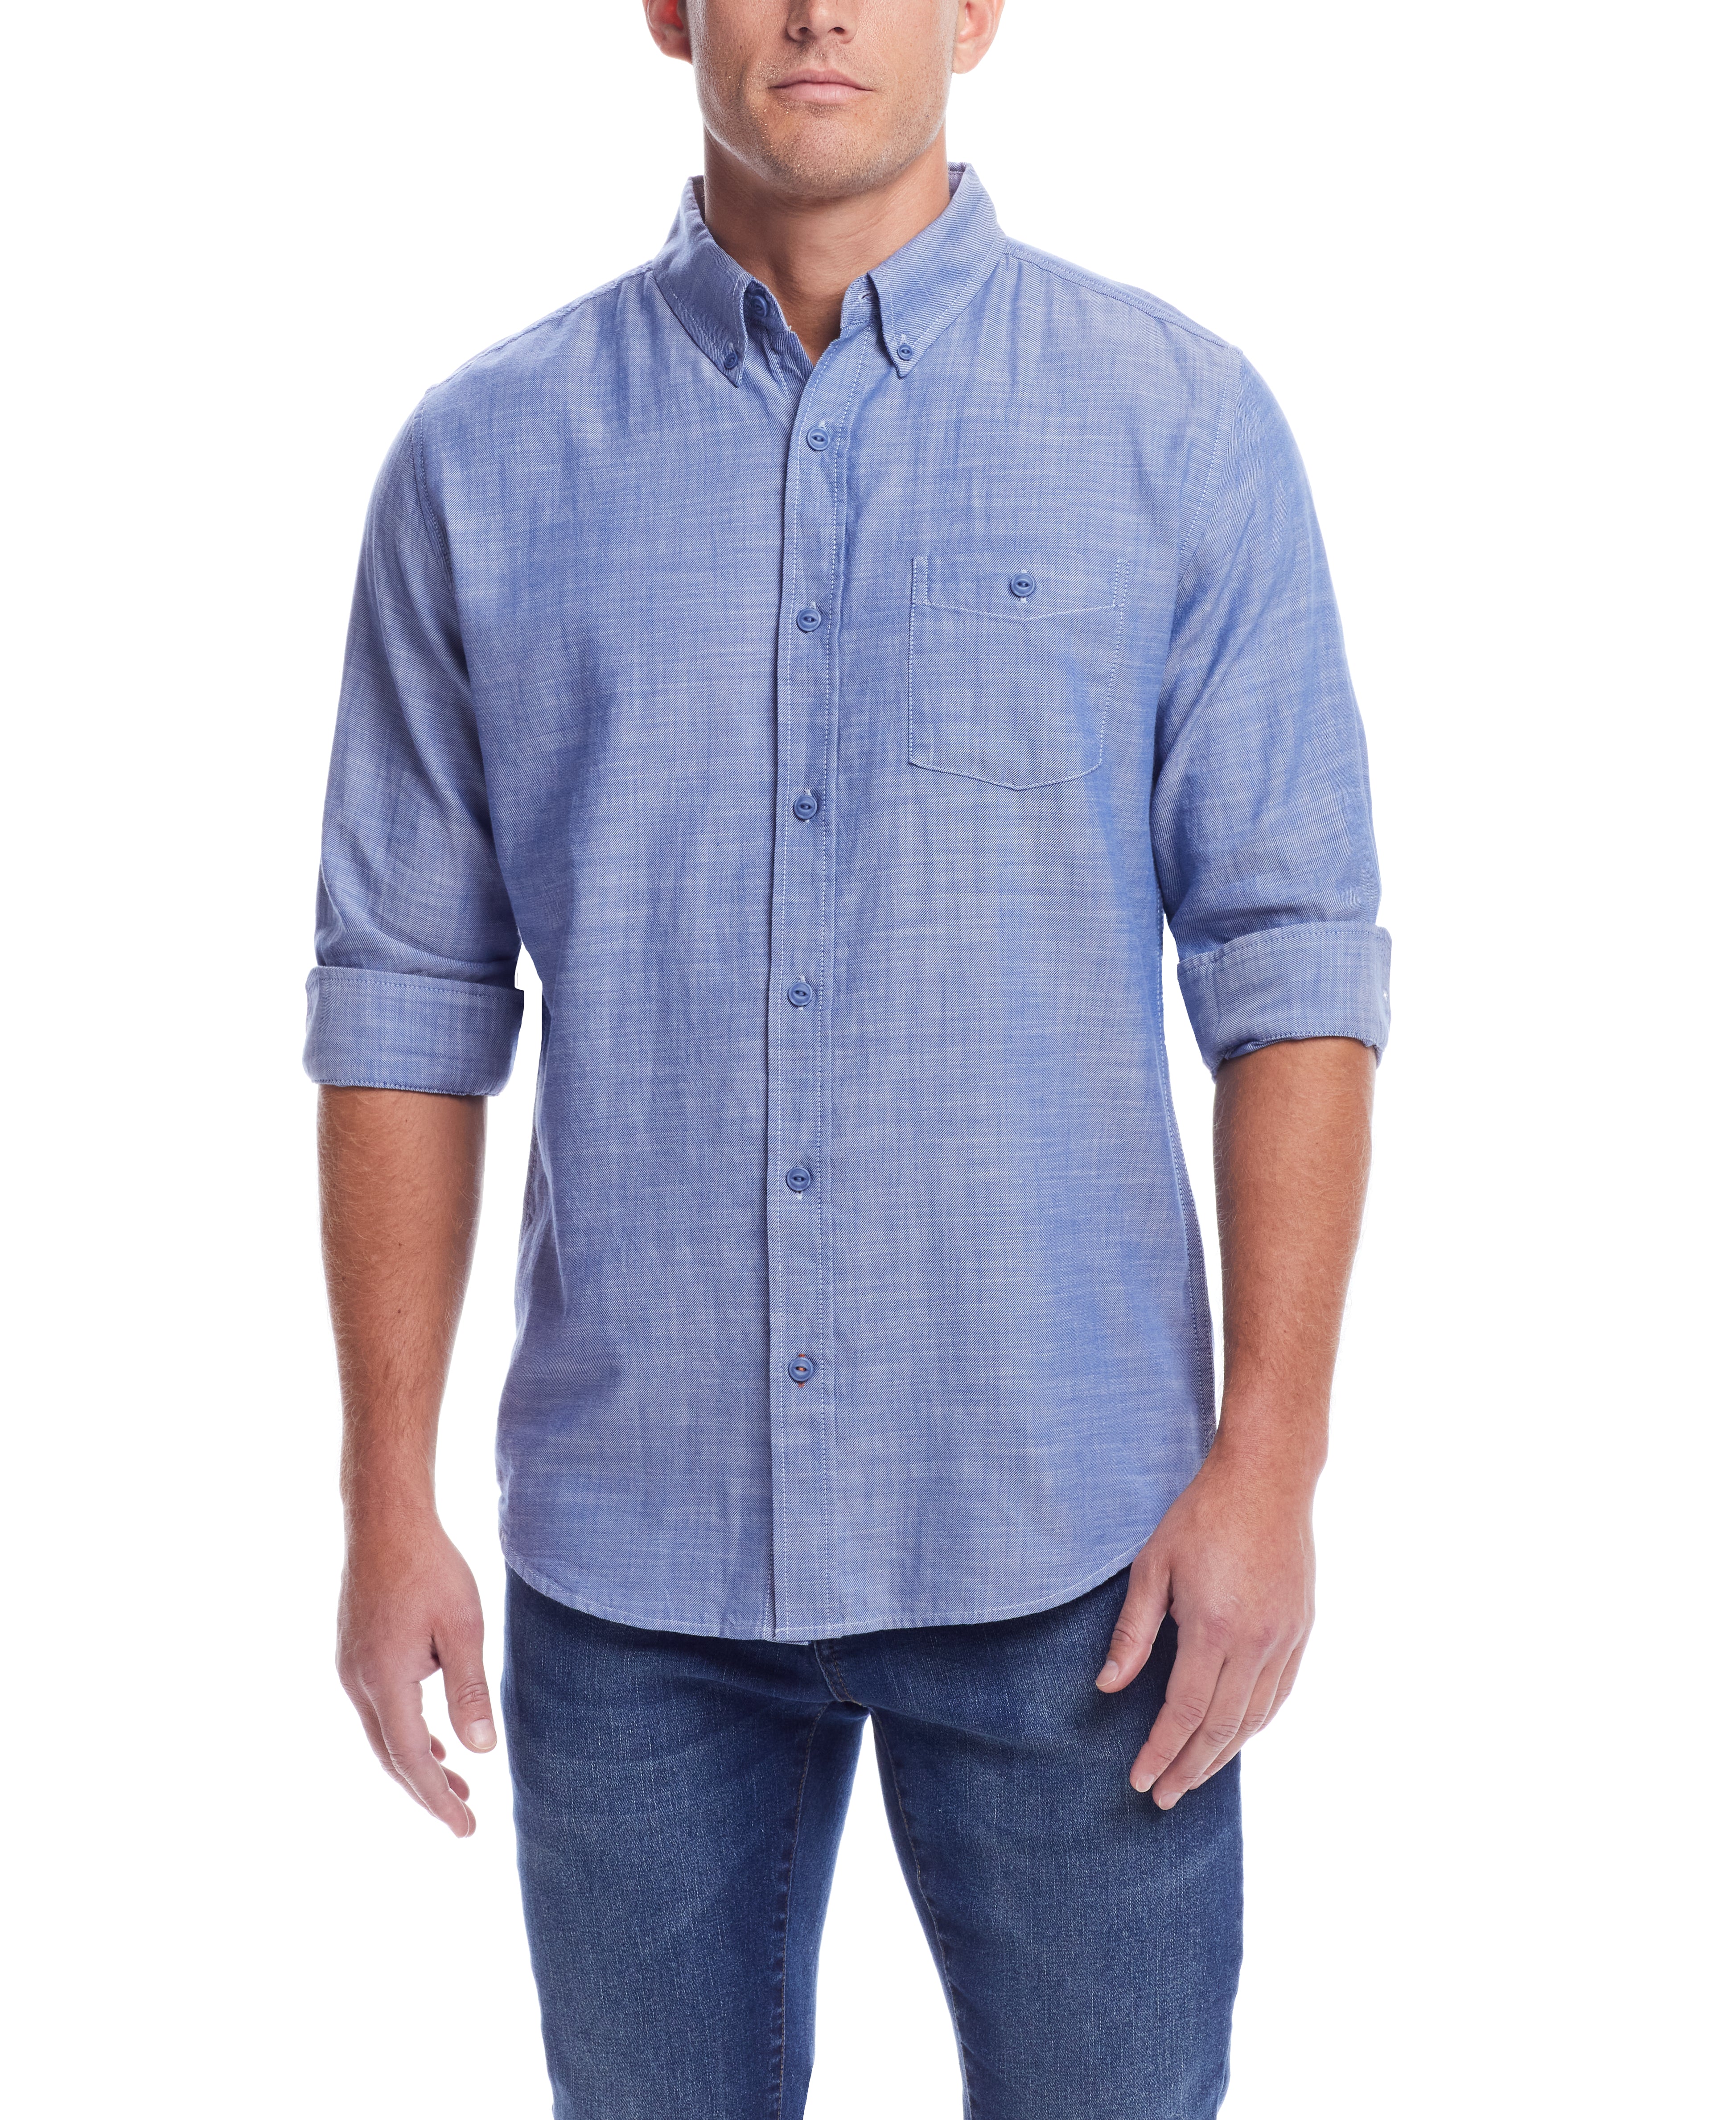 LONG SLEEVE SOLID COTTON TWILL SHIRT in FRENCH NAVY